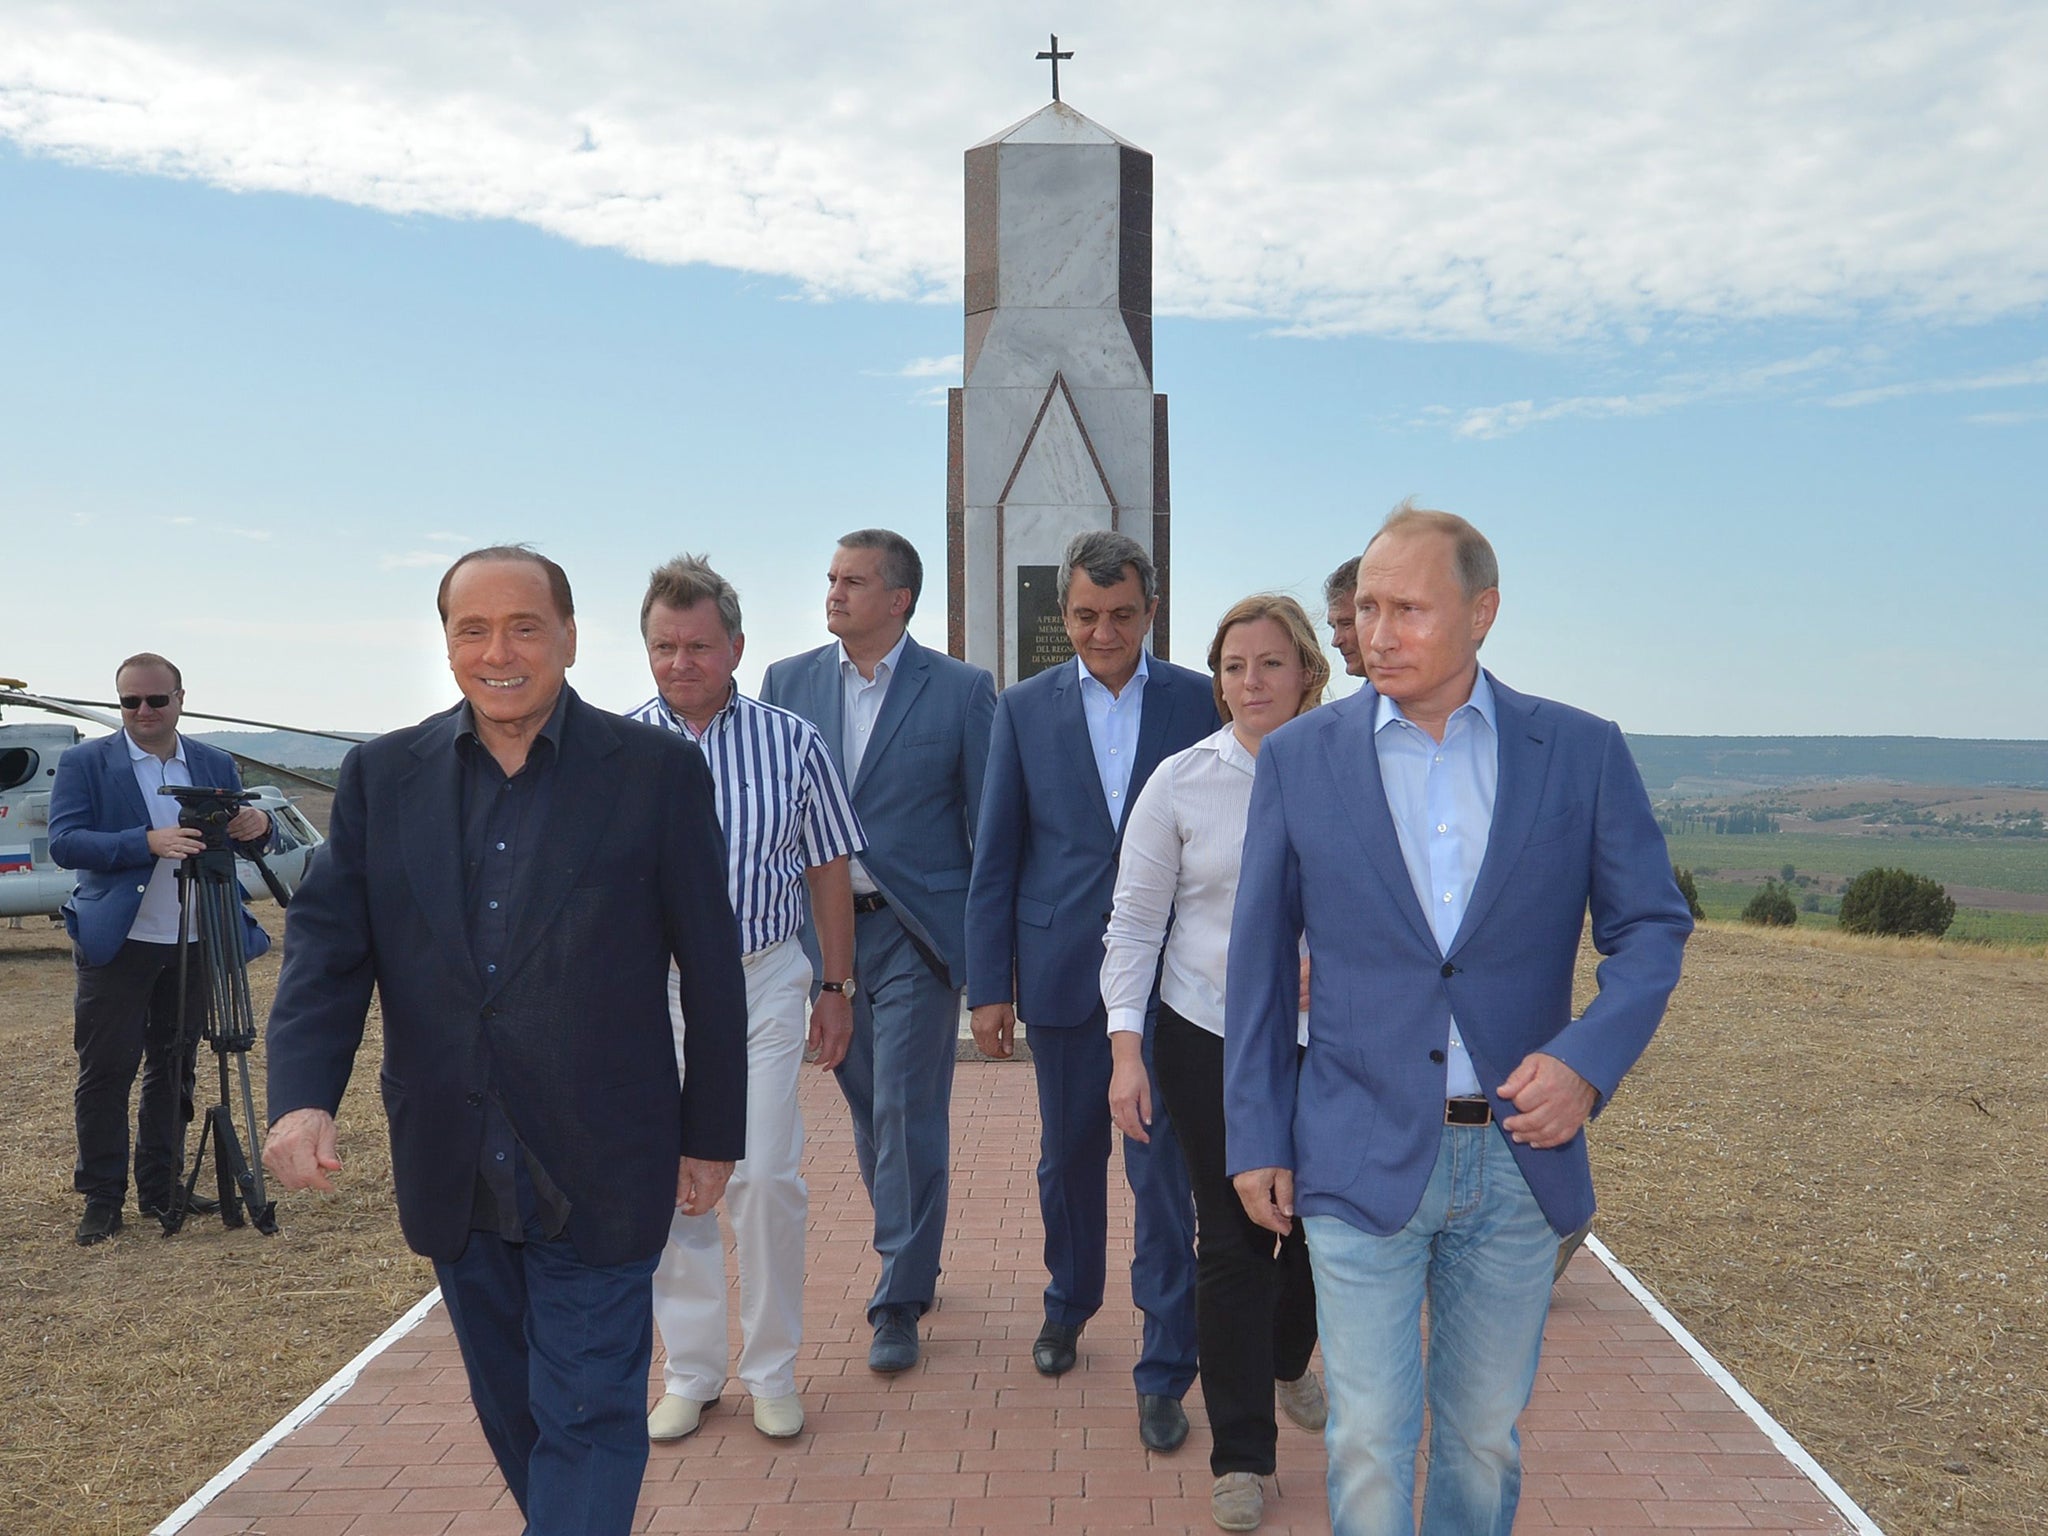 Russian President Vladimir Putin (R) and Italy's former prime minister Silvio Berlusconi (L) visit the memorial to the soldiers from the Kingdom of Sardinia killed in the Crimean War in 19-th century, near Mount Gasfort outside Sevastopol, Crimea